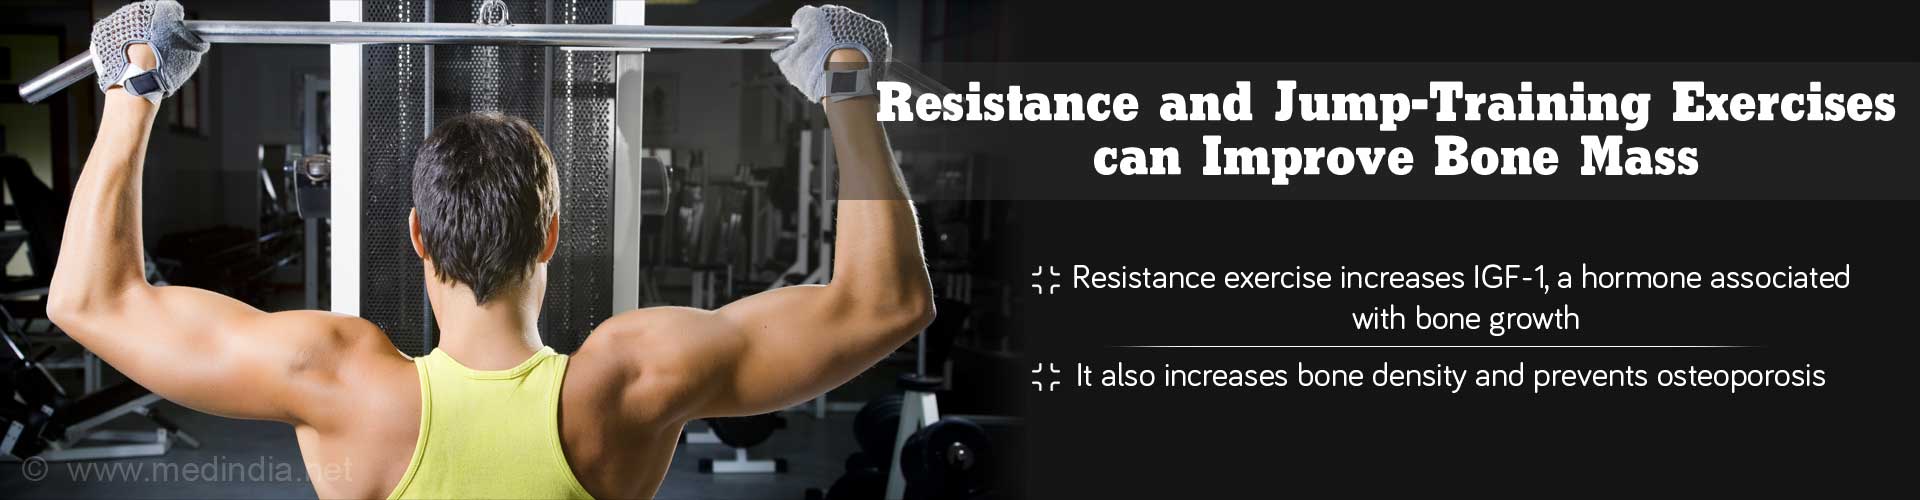 resistance and jump-training exercises can improve bone mass
- resistance exercise increases IGF-1, a hormone associated with bone growth
- it also increases bone density and prevents osteoporosis